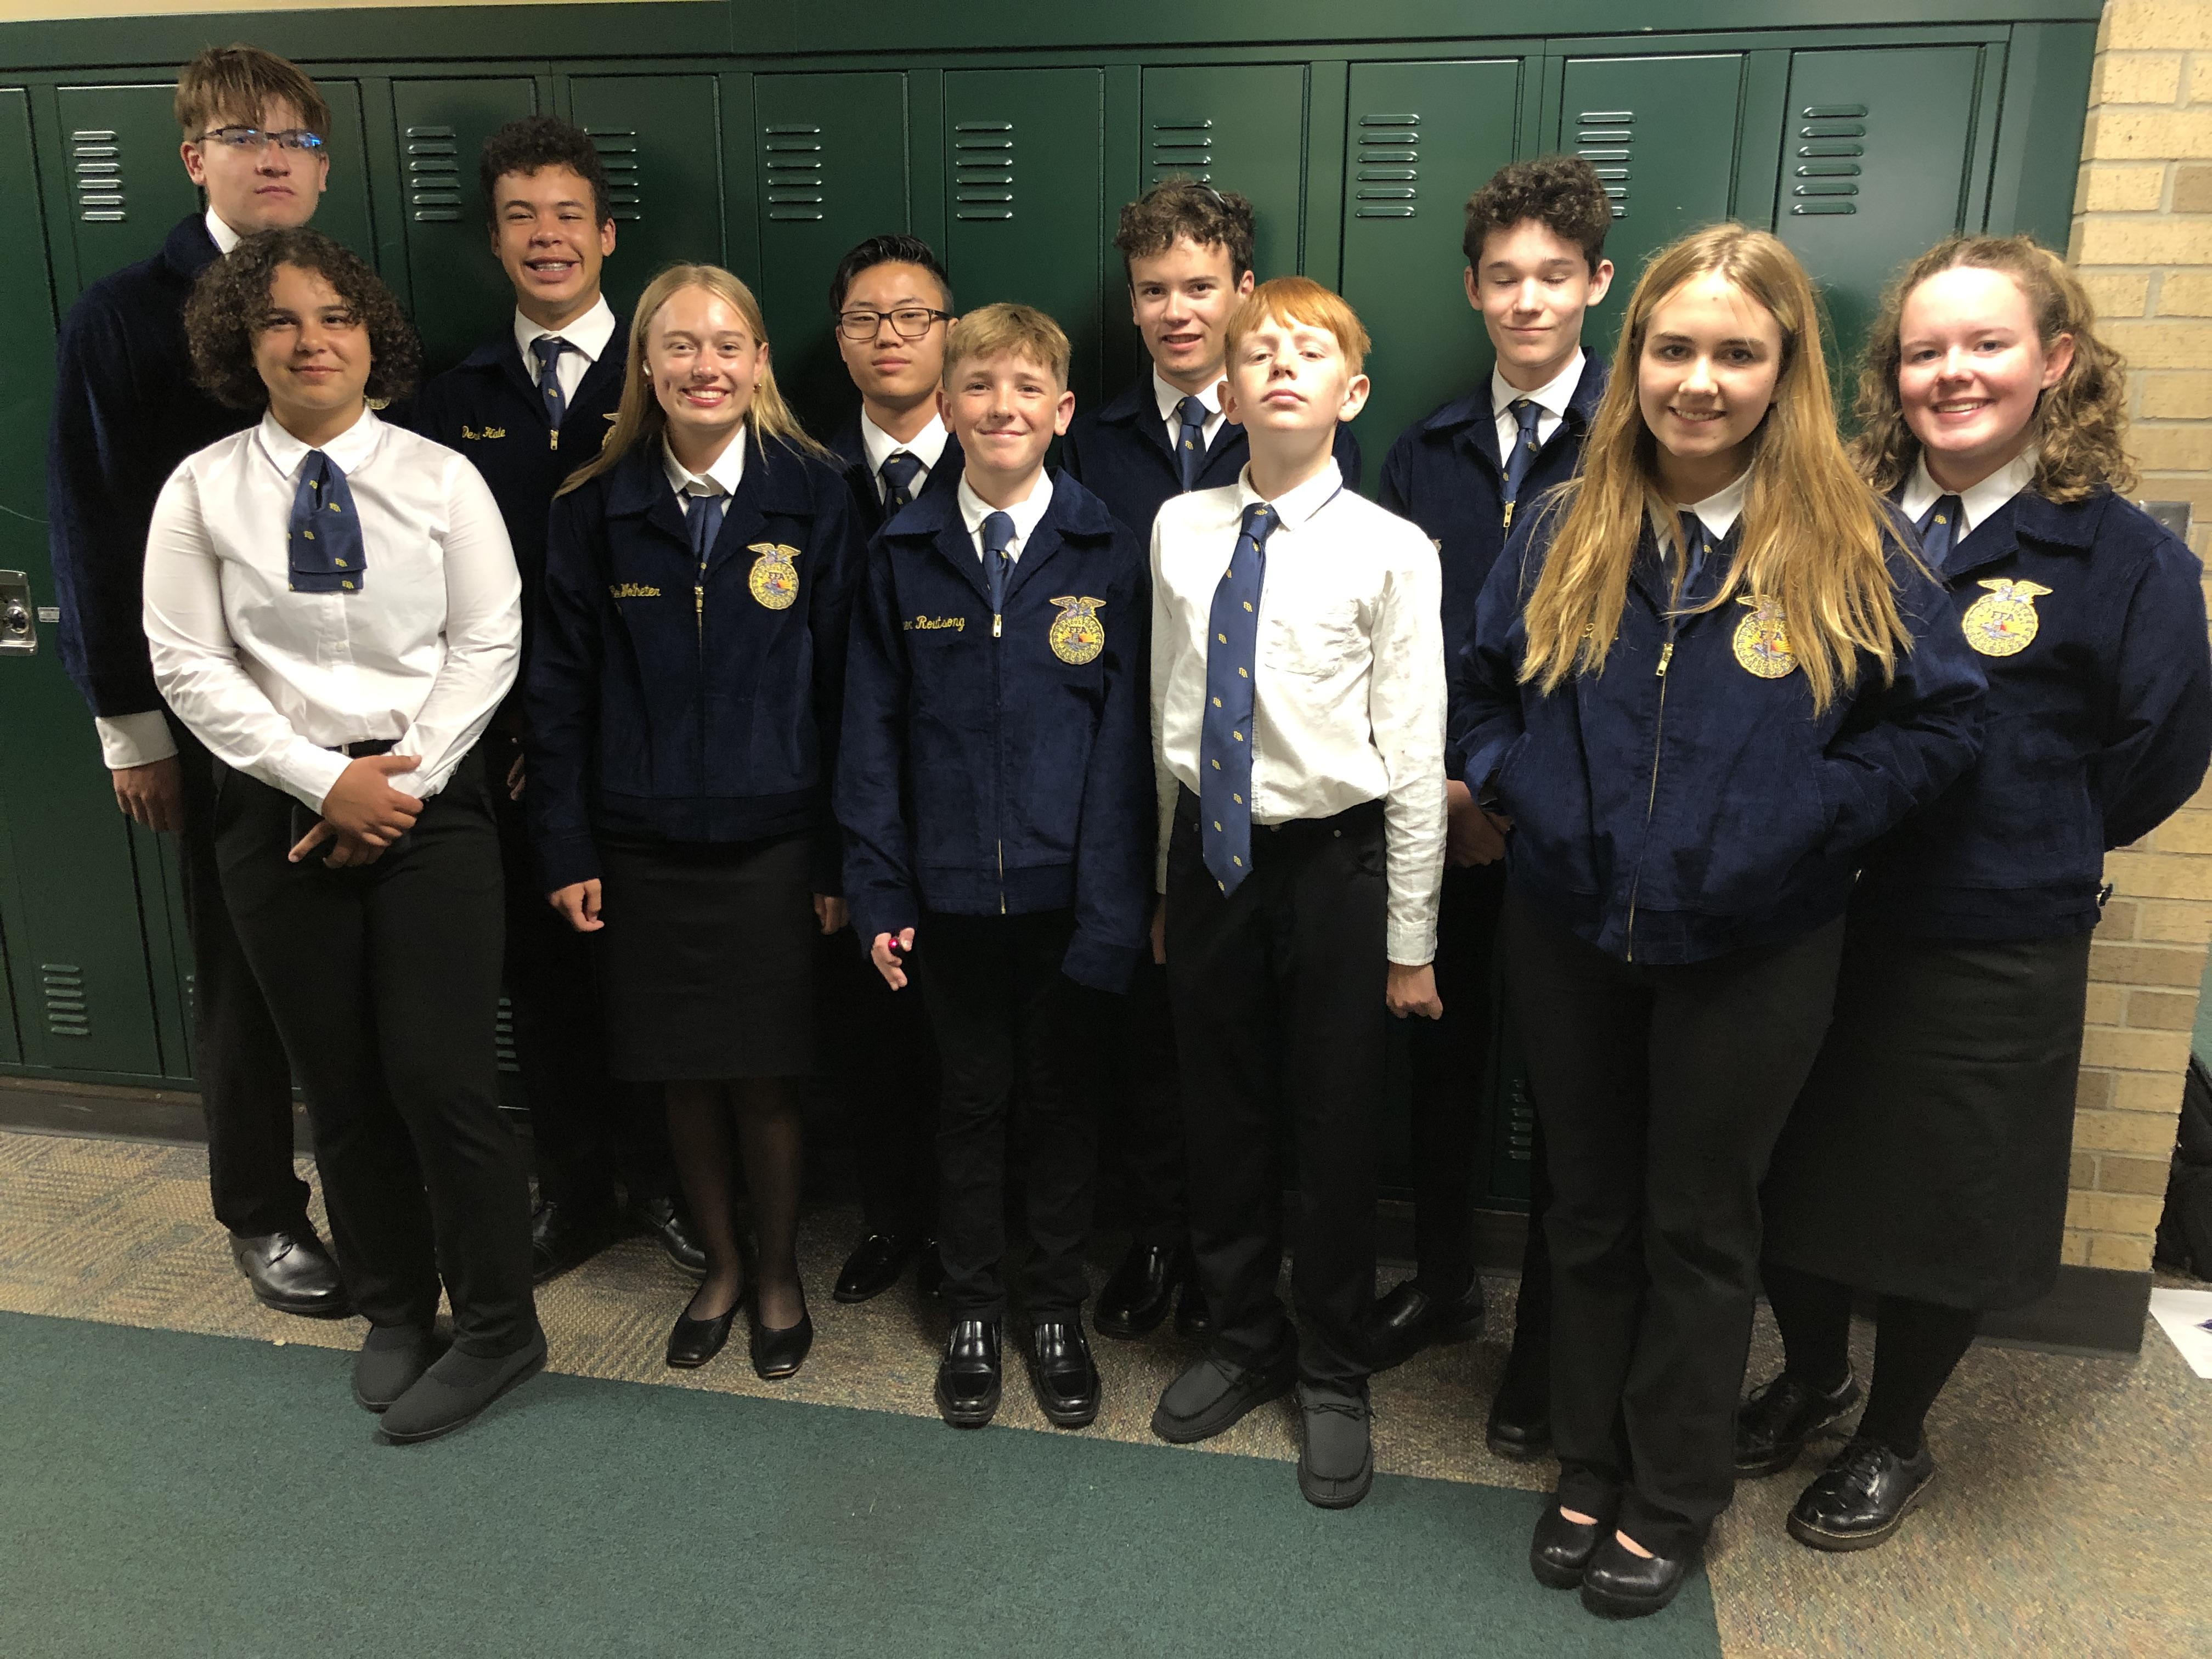 FFA students in jackets